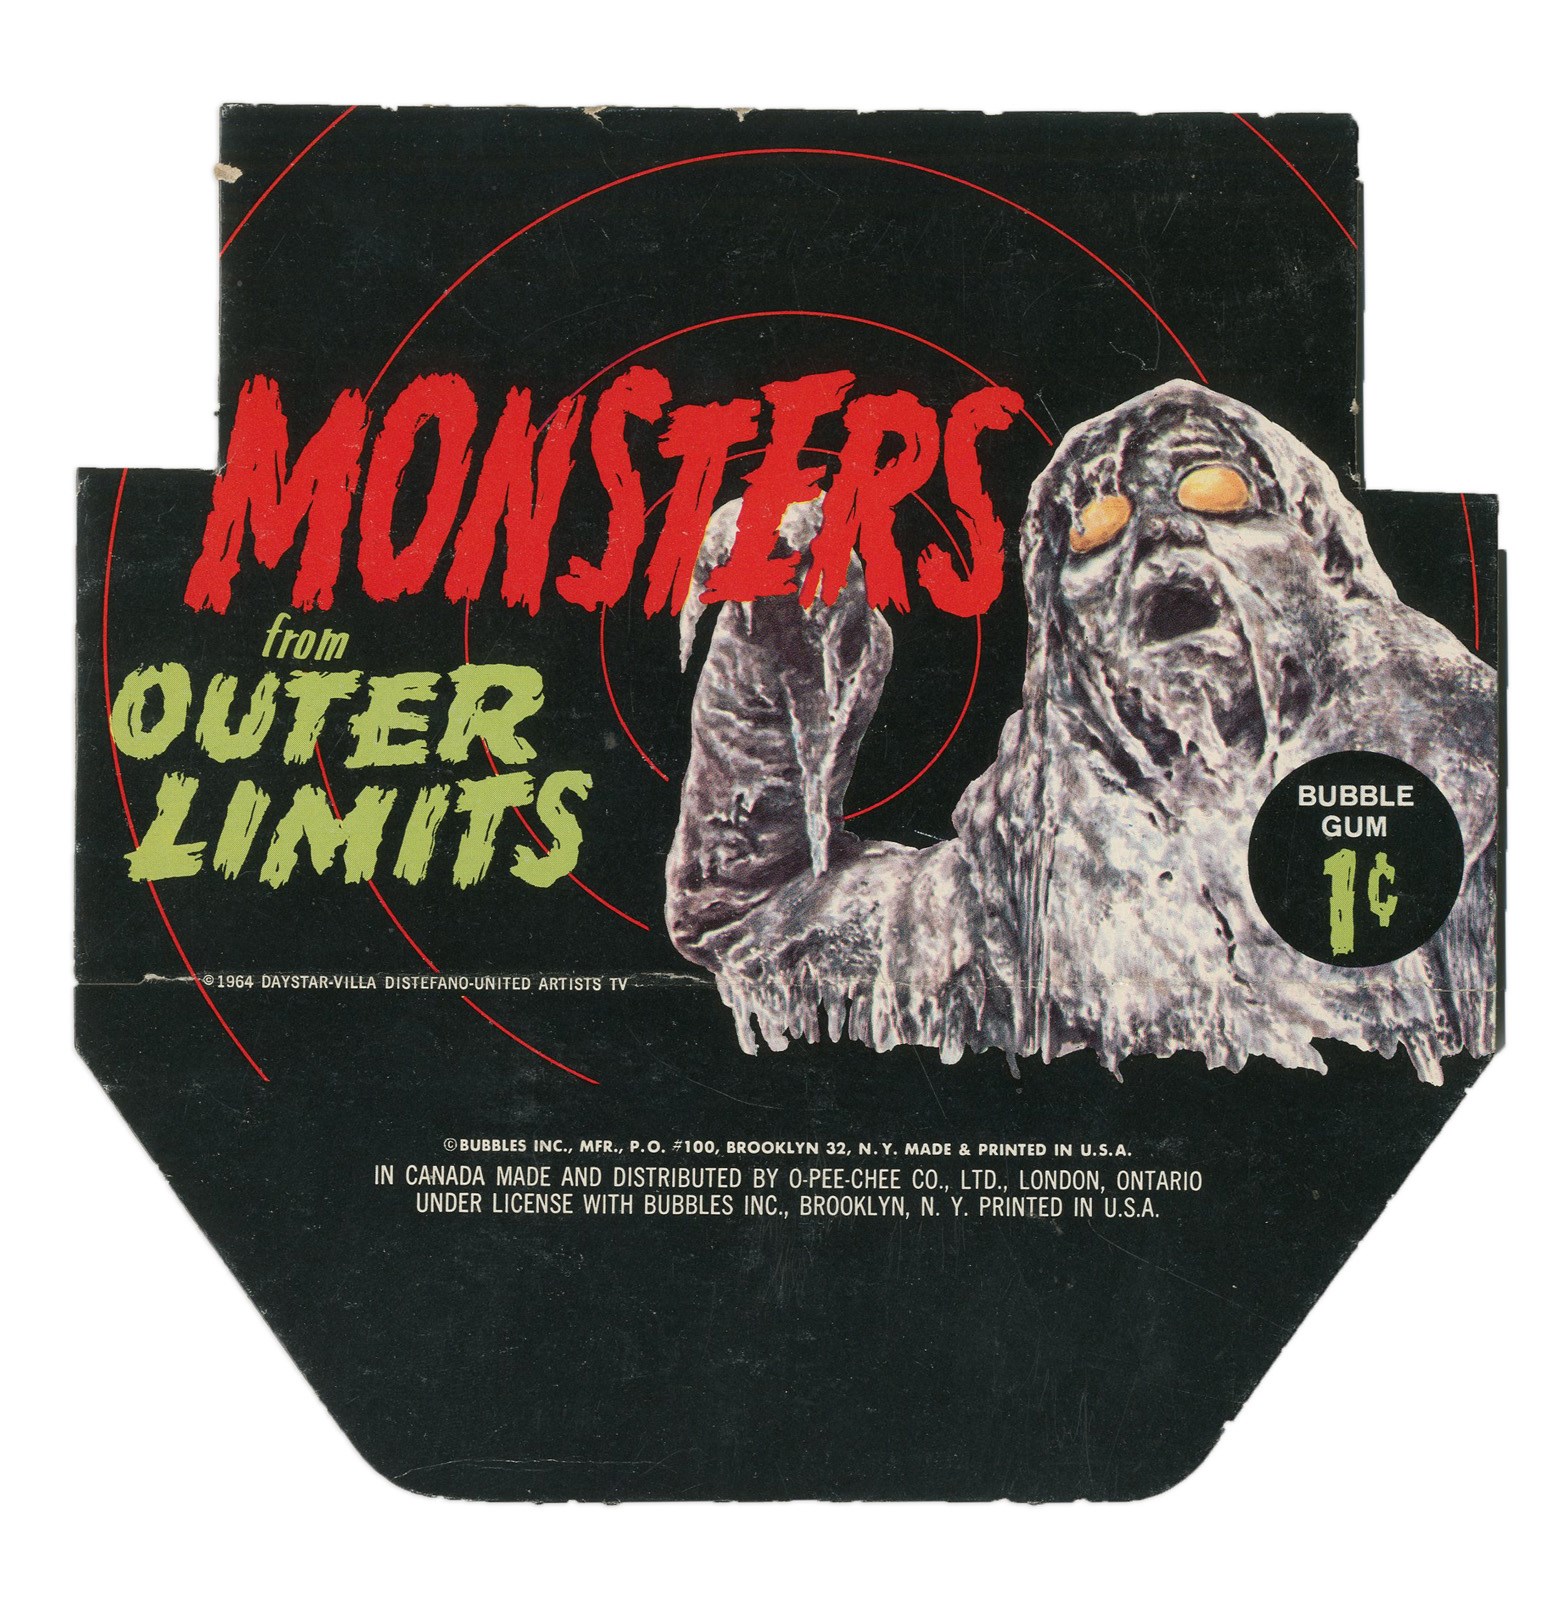 1964 Topps Outer Limits Display Box Top - Original File Copy!